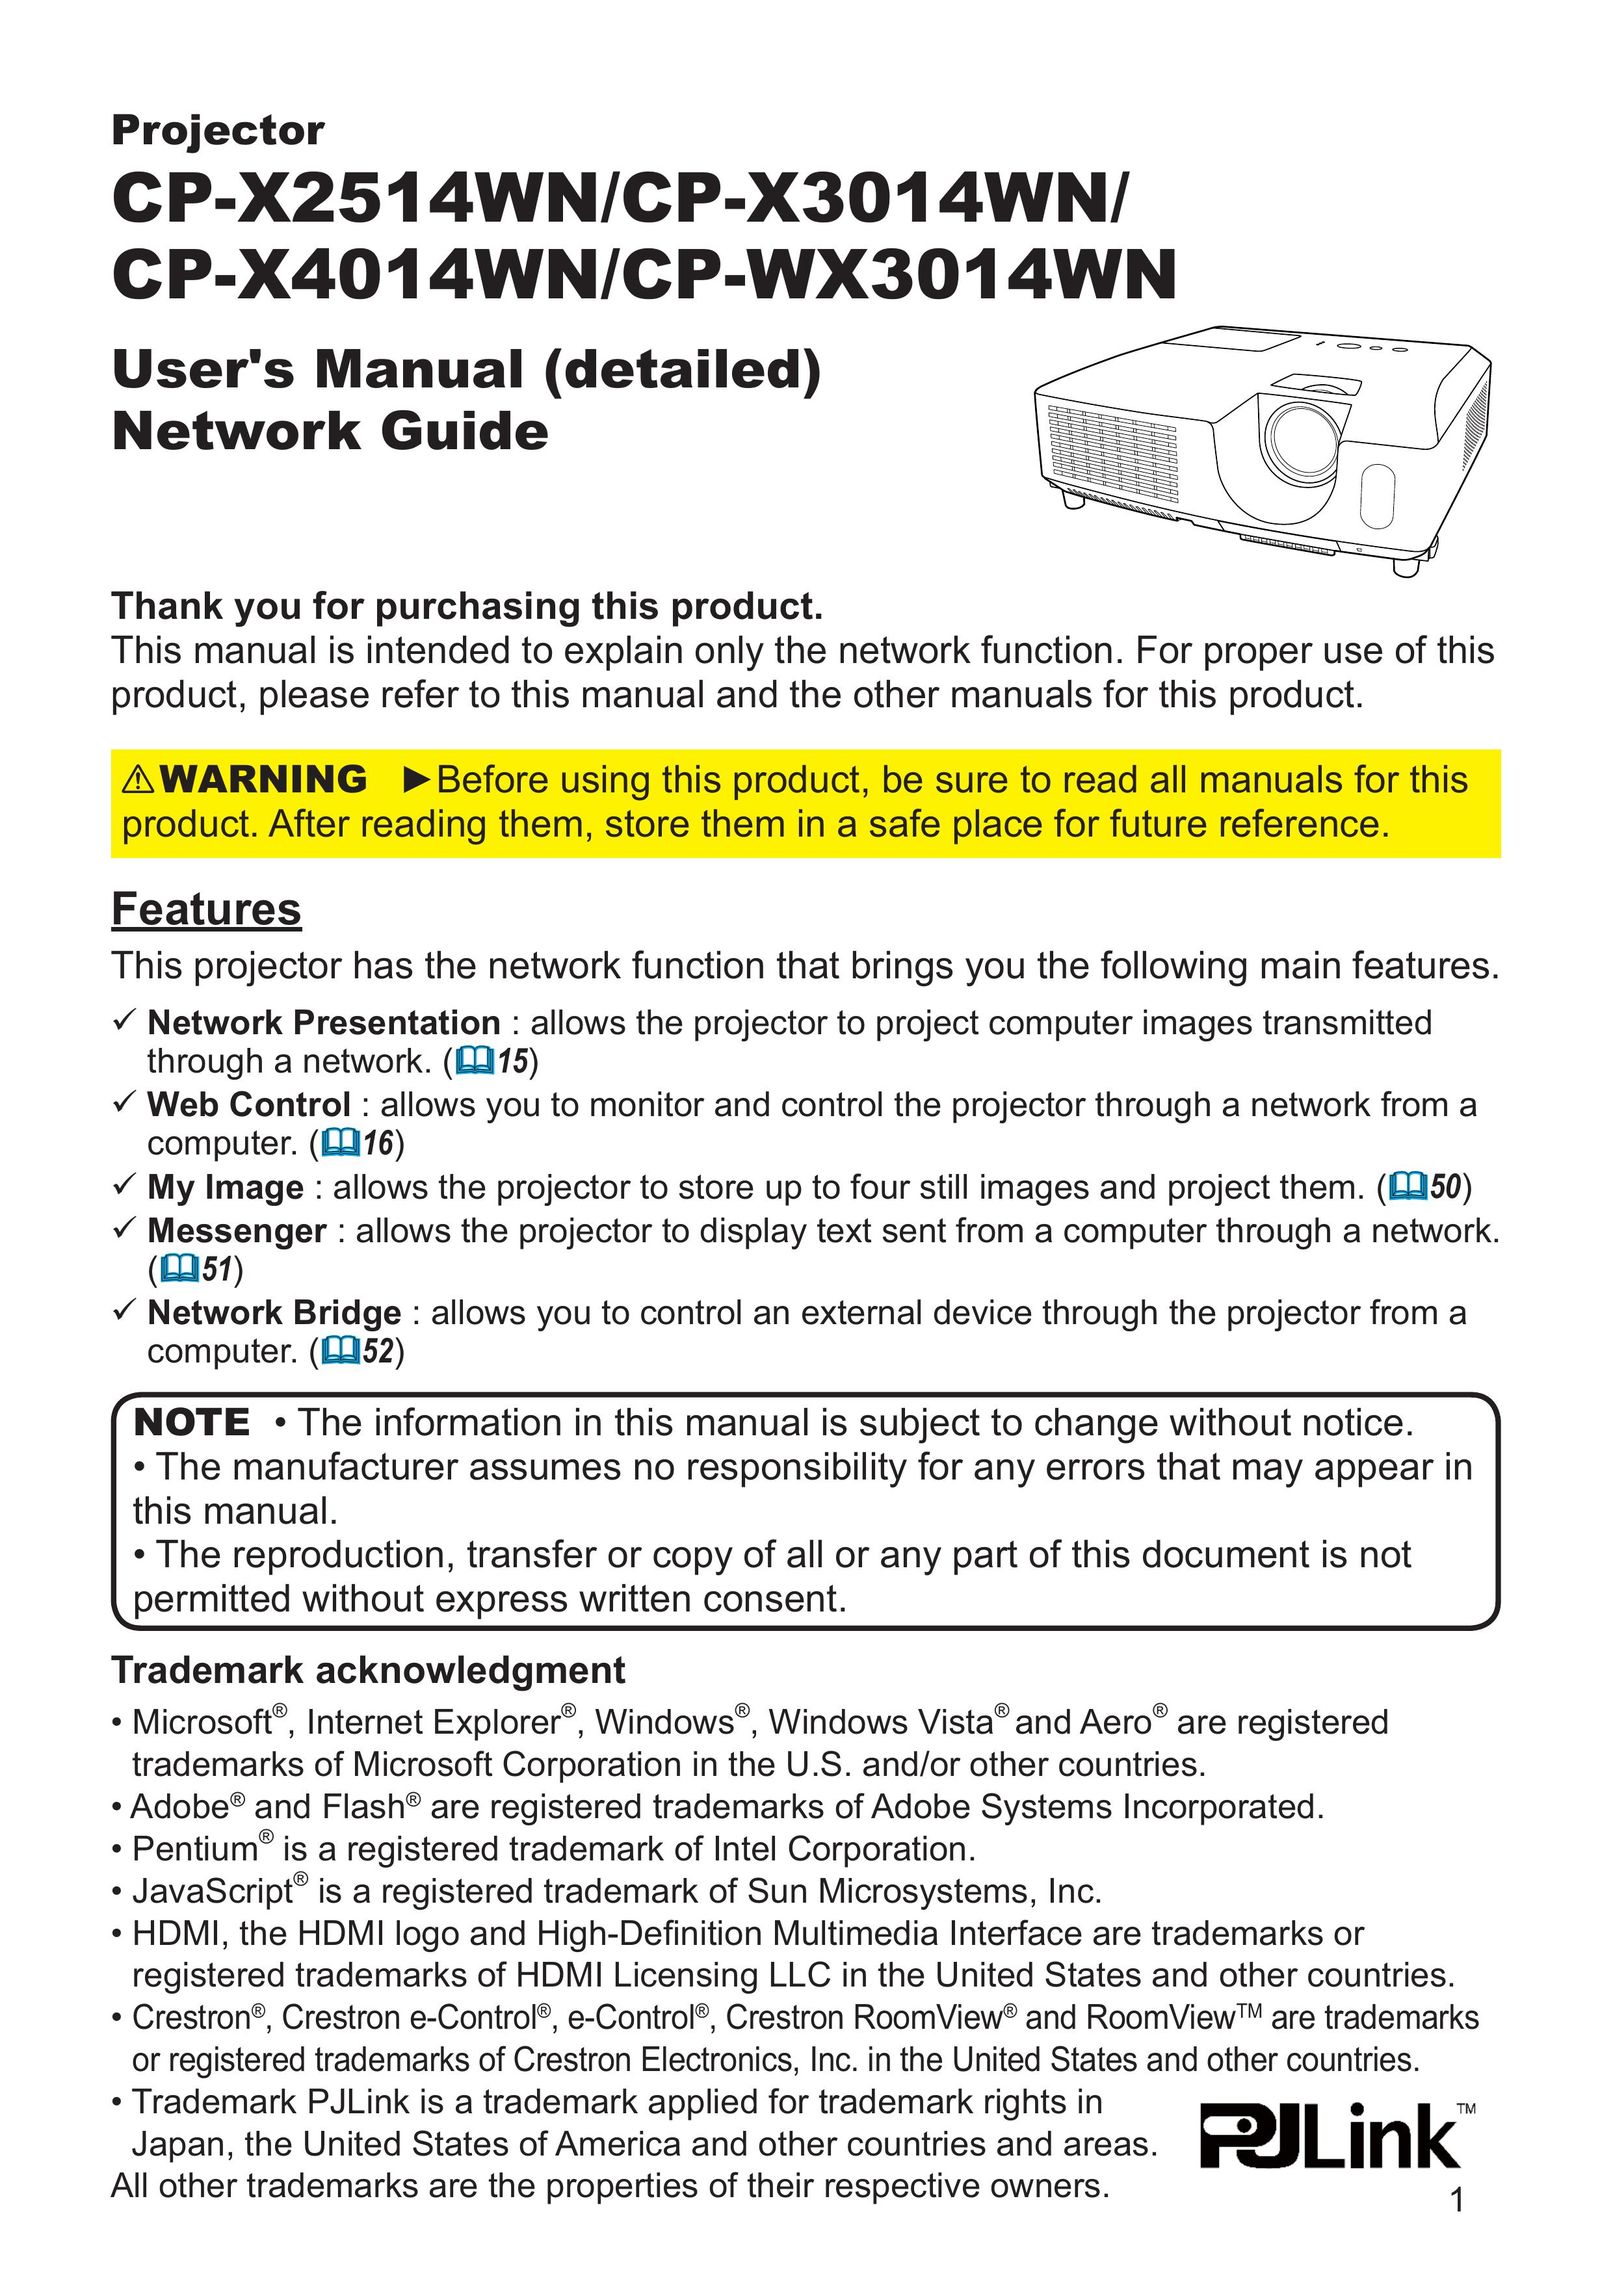 Crestron electronic CP-X4014WN Projector User Manual